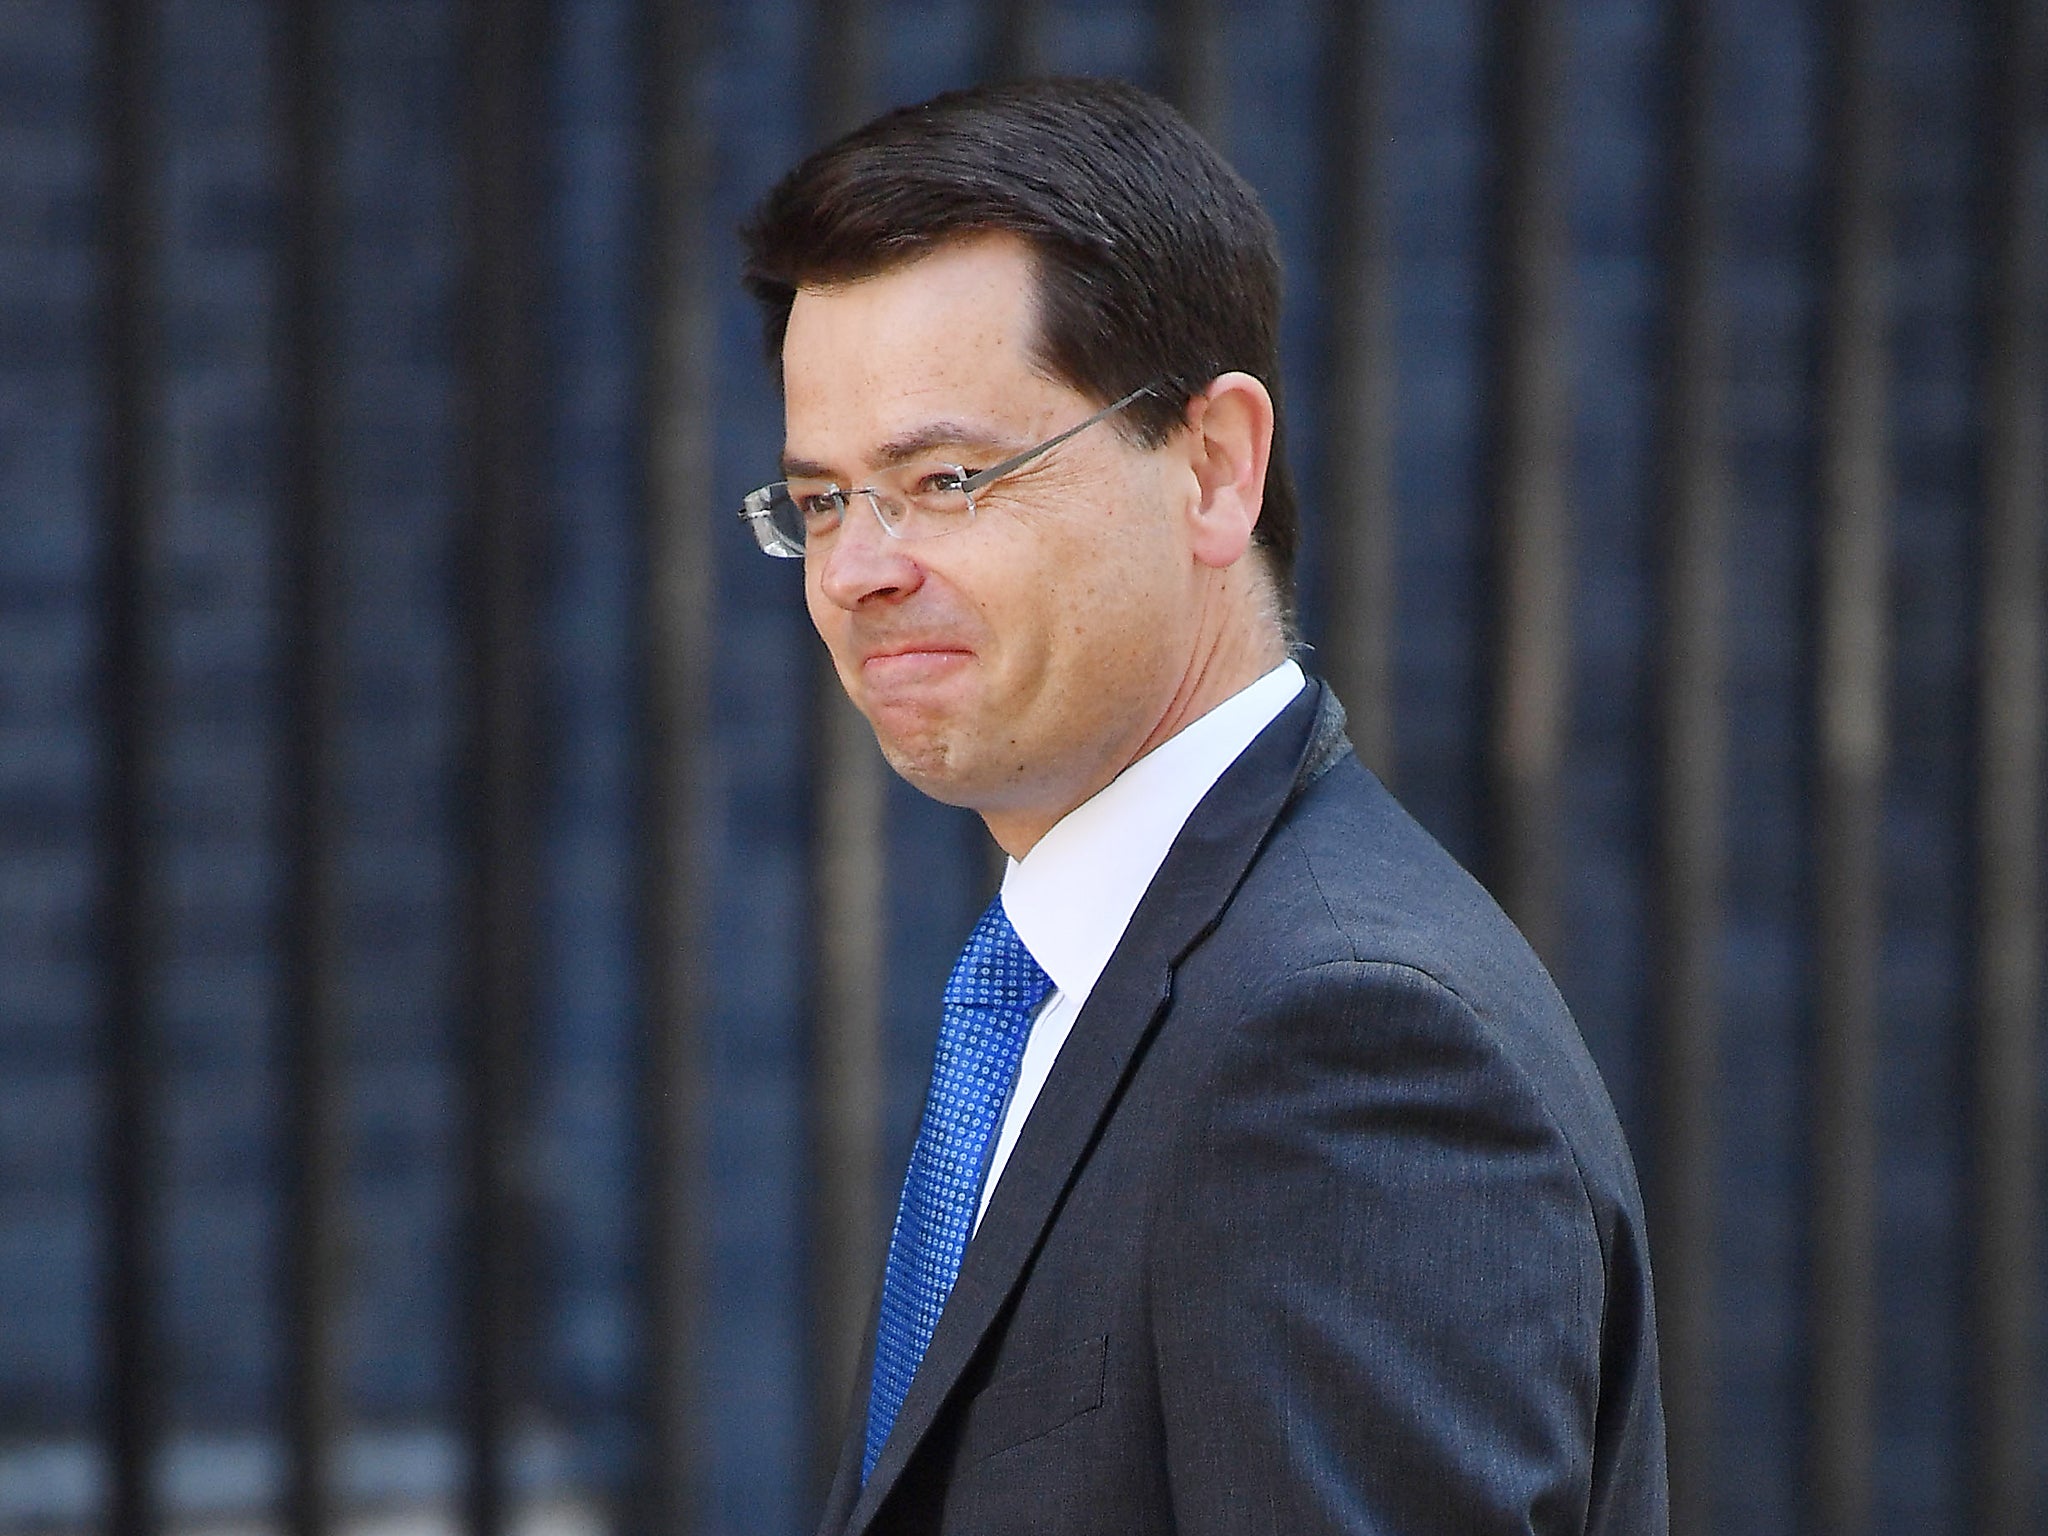 Northern Ireland Secretary James Brokenshire said he was still confident a deal could be reached